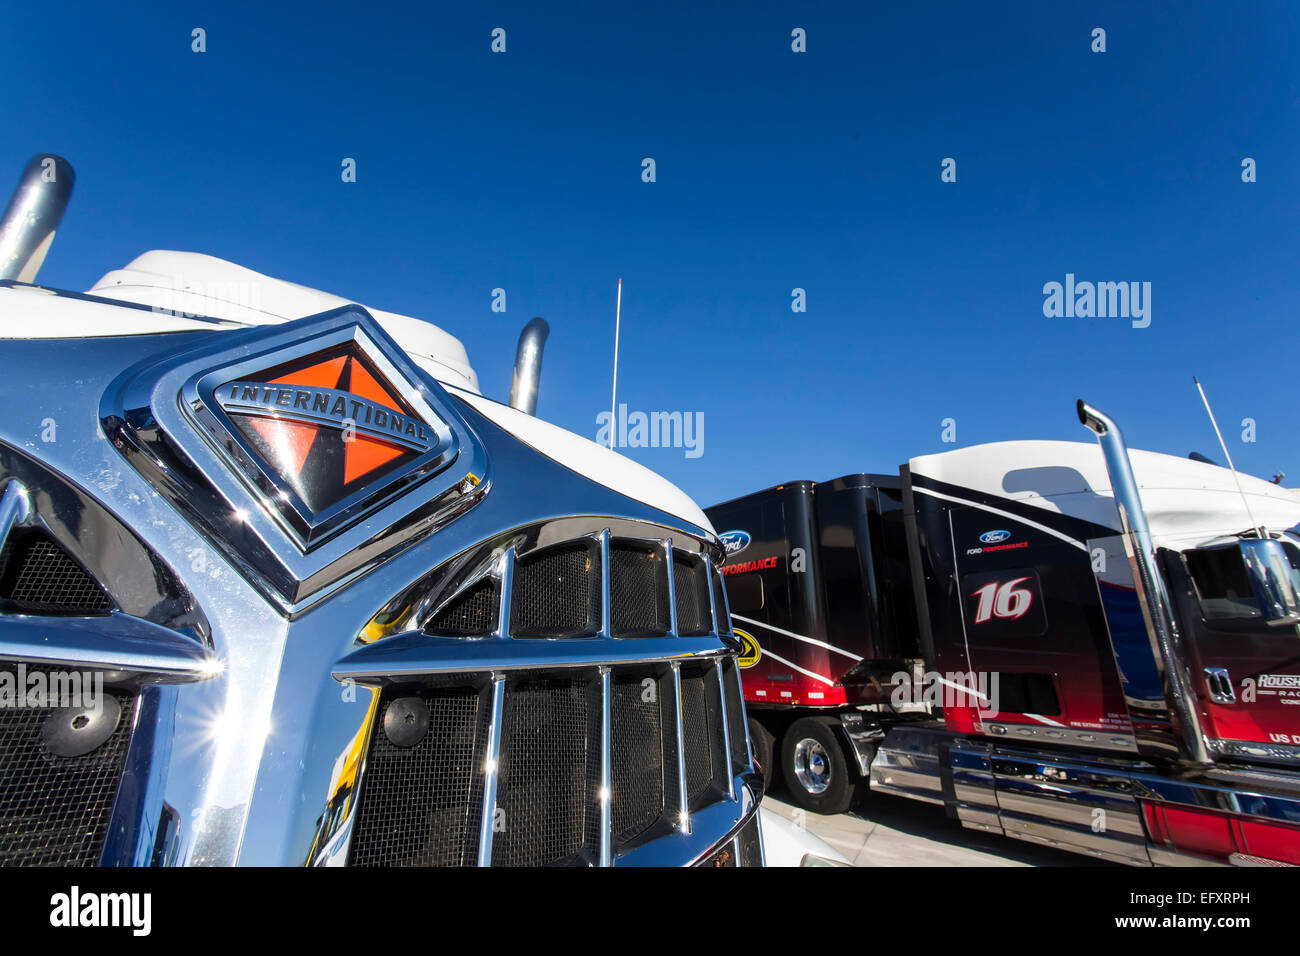 Concord, NC, USA. 11th Feb, 2015. Concord, NC - Feb 11, 2015: The Roush Fenway Racing load up their cars before heading off to Daytona for the 2015 Speedweeks at Roush Fenway Racing in Concord, NC. Credit:  csm/Alamy Live News Stock Photo